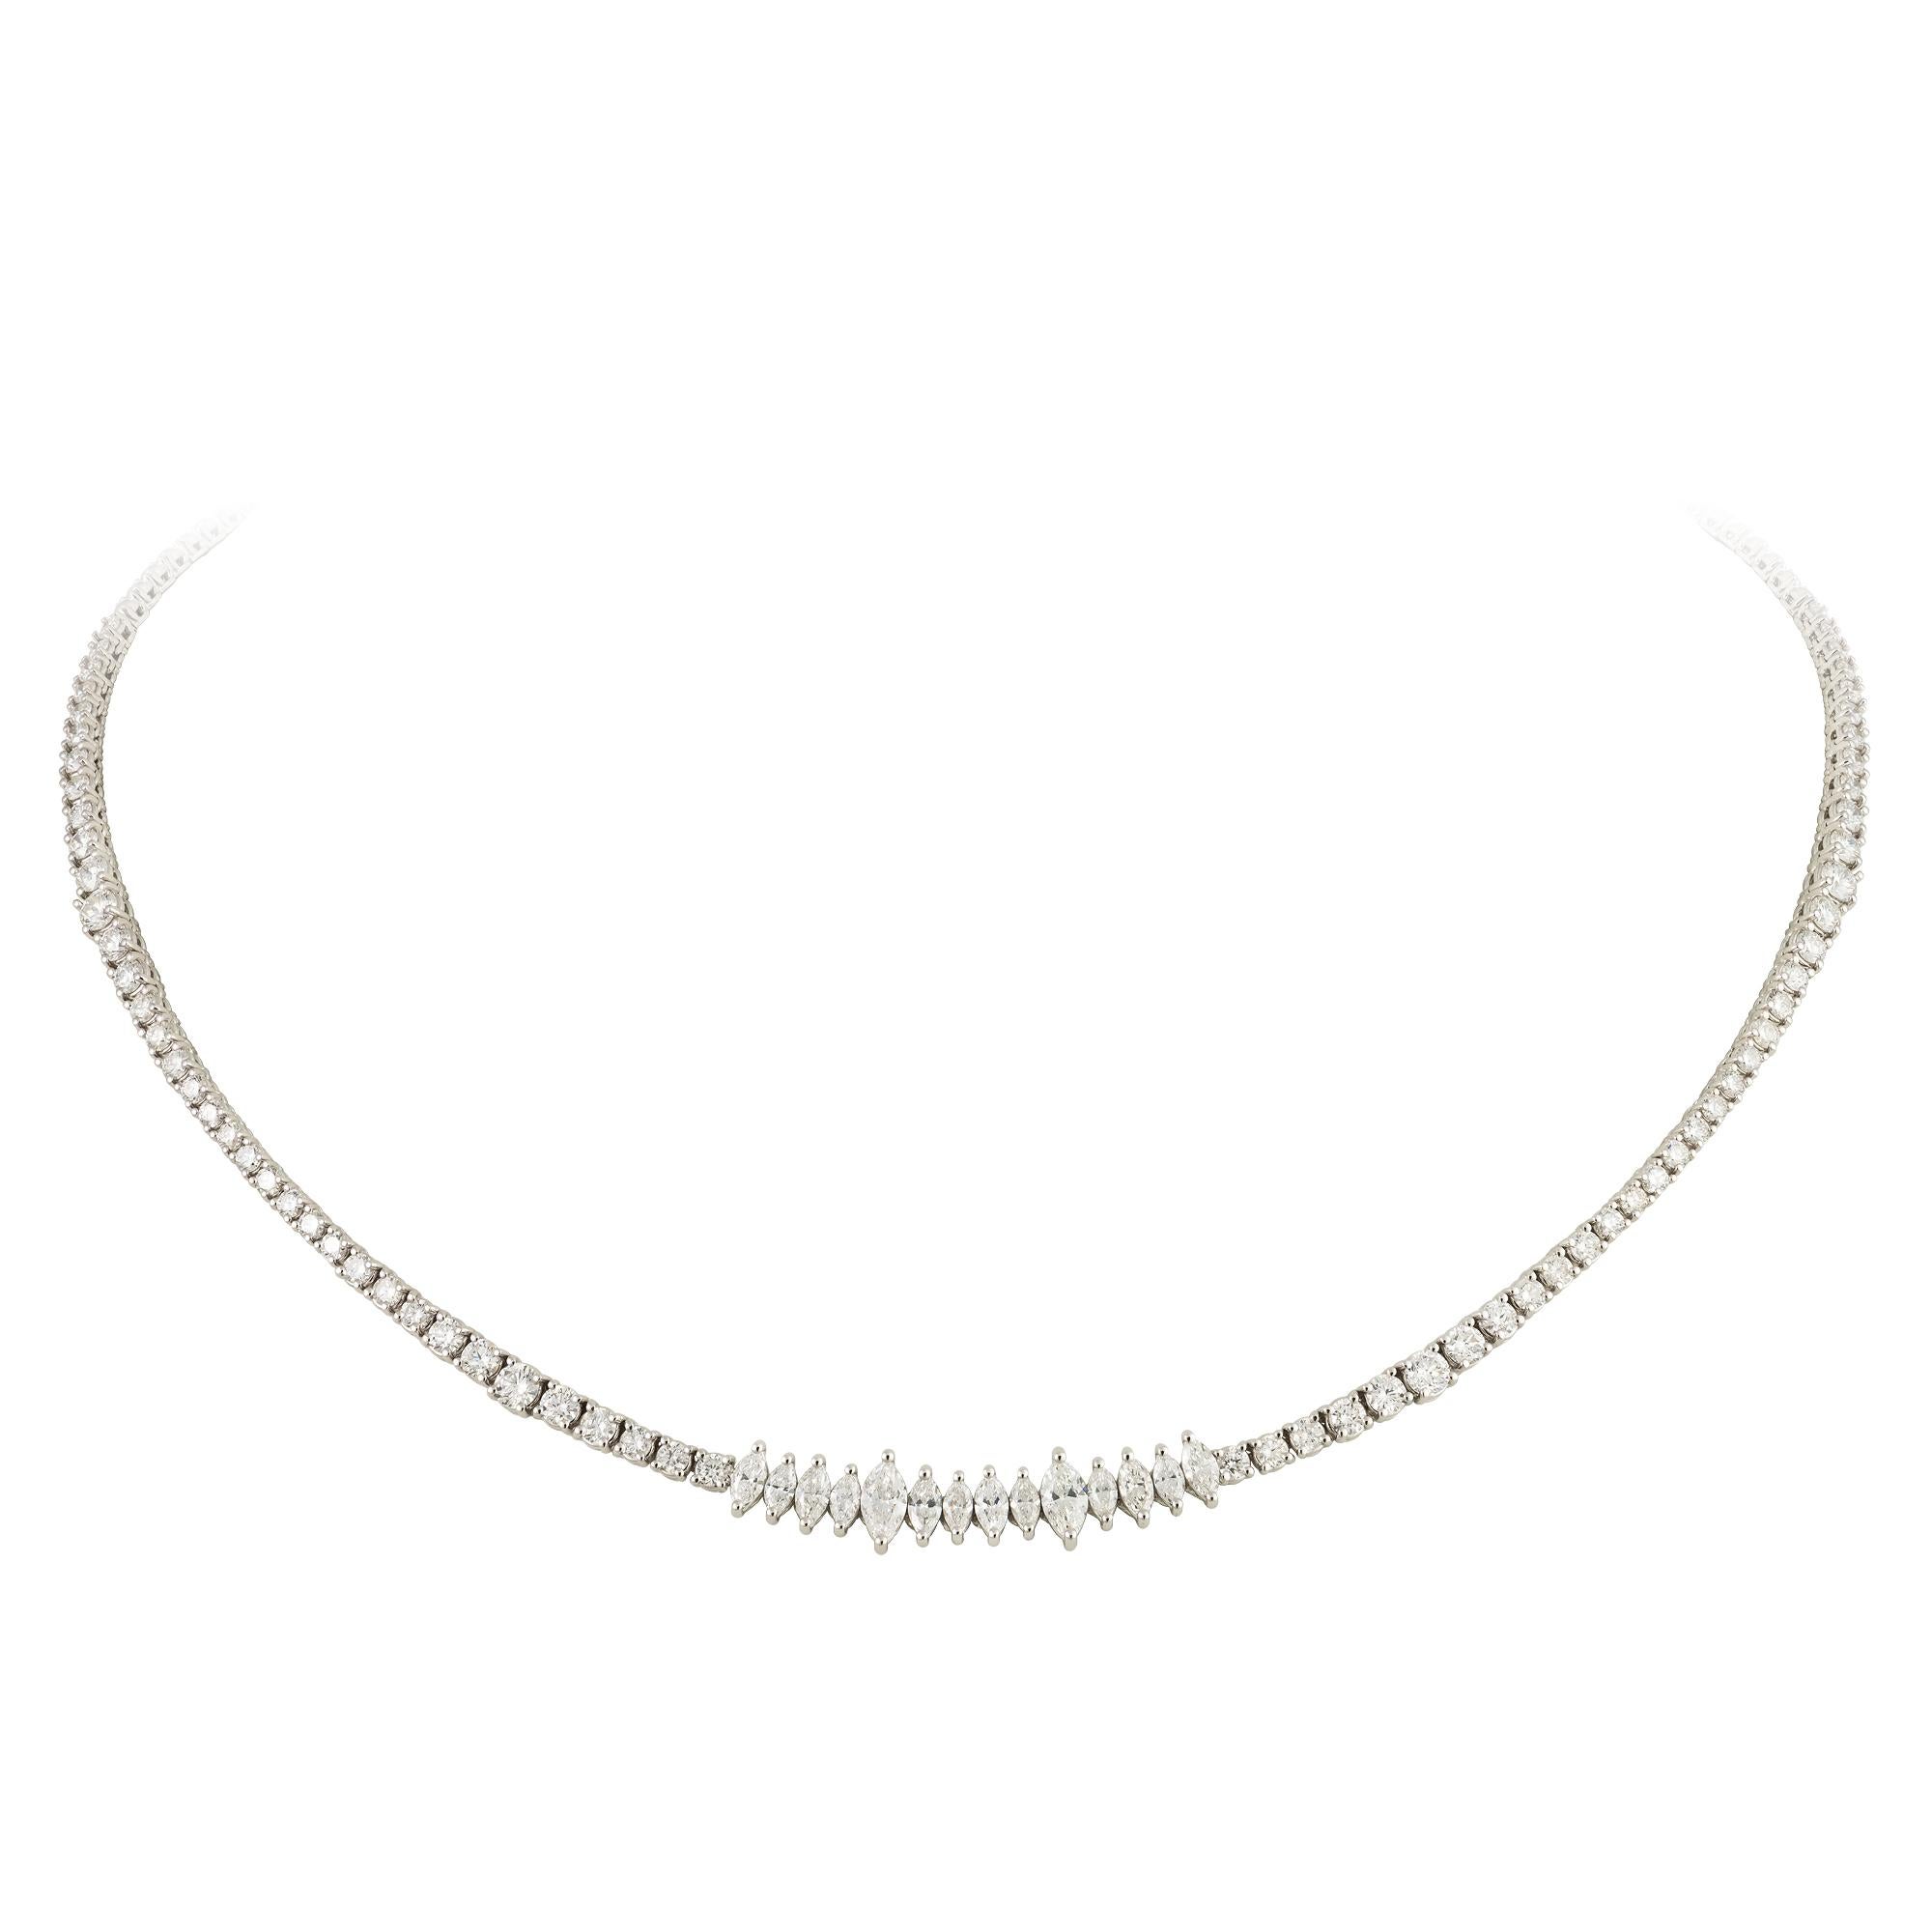 Fashion White Gold 18K Necklace Diamond For Her In New Condition For Sale In Montreux, CH